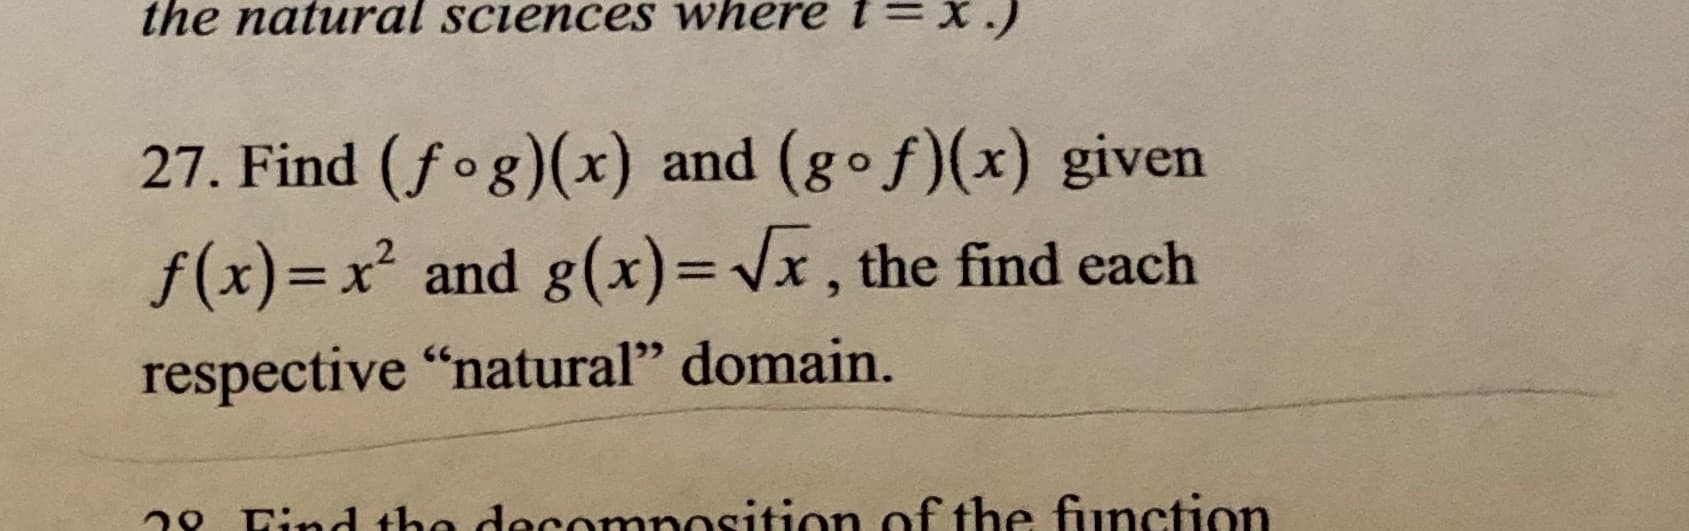 the natural sciences where i= x.)
27. Find (fog)(x) and (gof)(x) given
f(x)=x² and g(x)= /x , the find each
respective "natural" domain.
28 Find the docomnosition of the function
